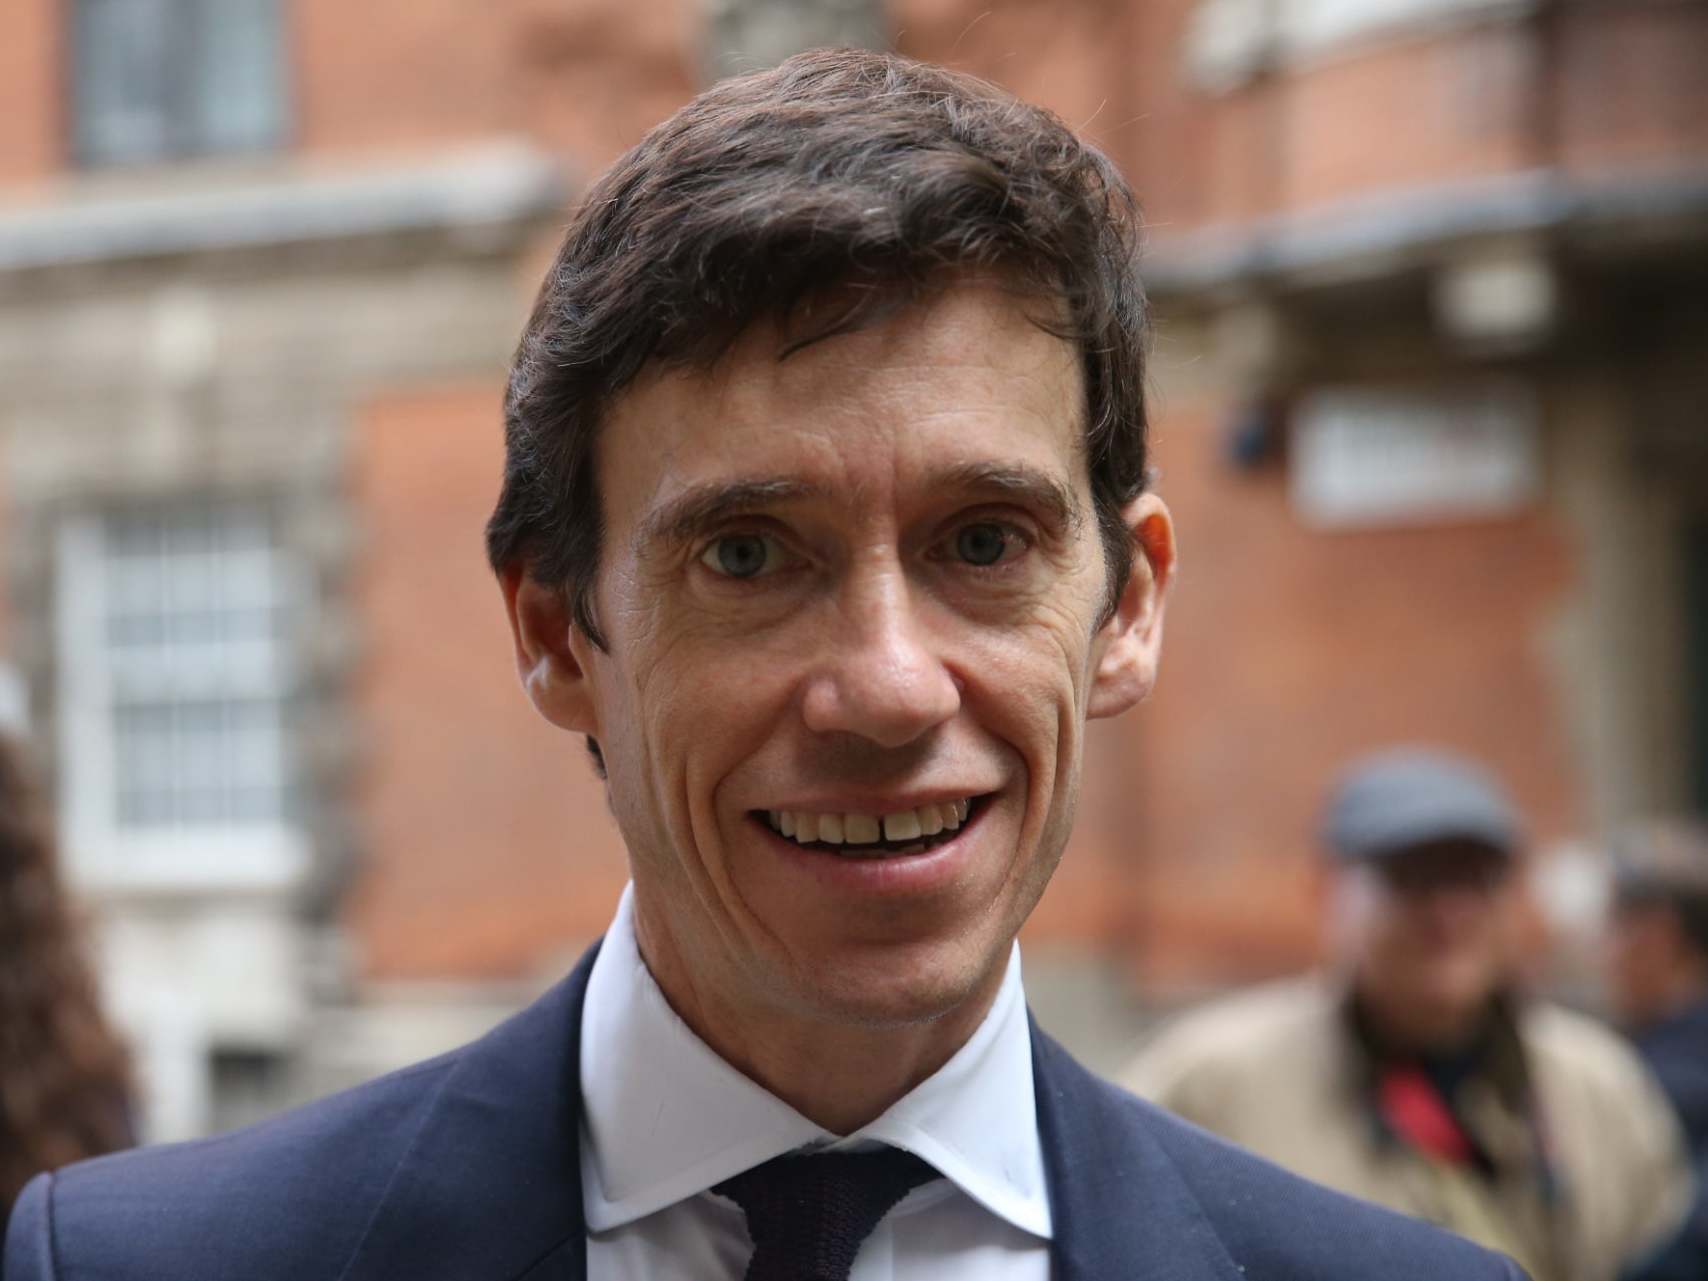 Rory Stewart has announced he will stand down at the next election